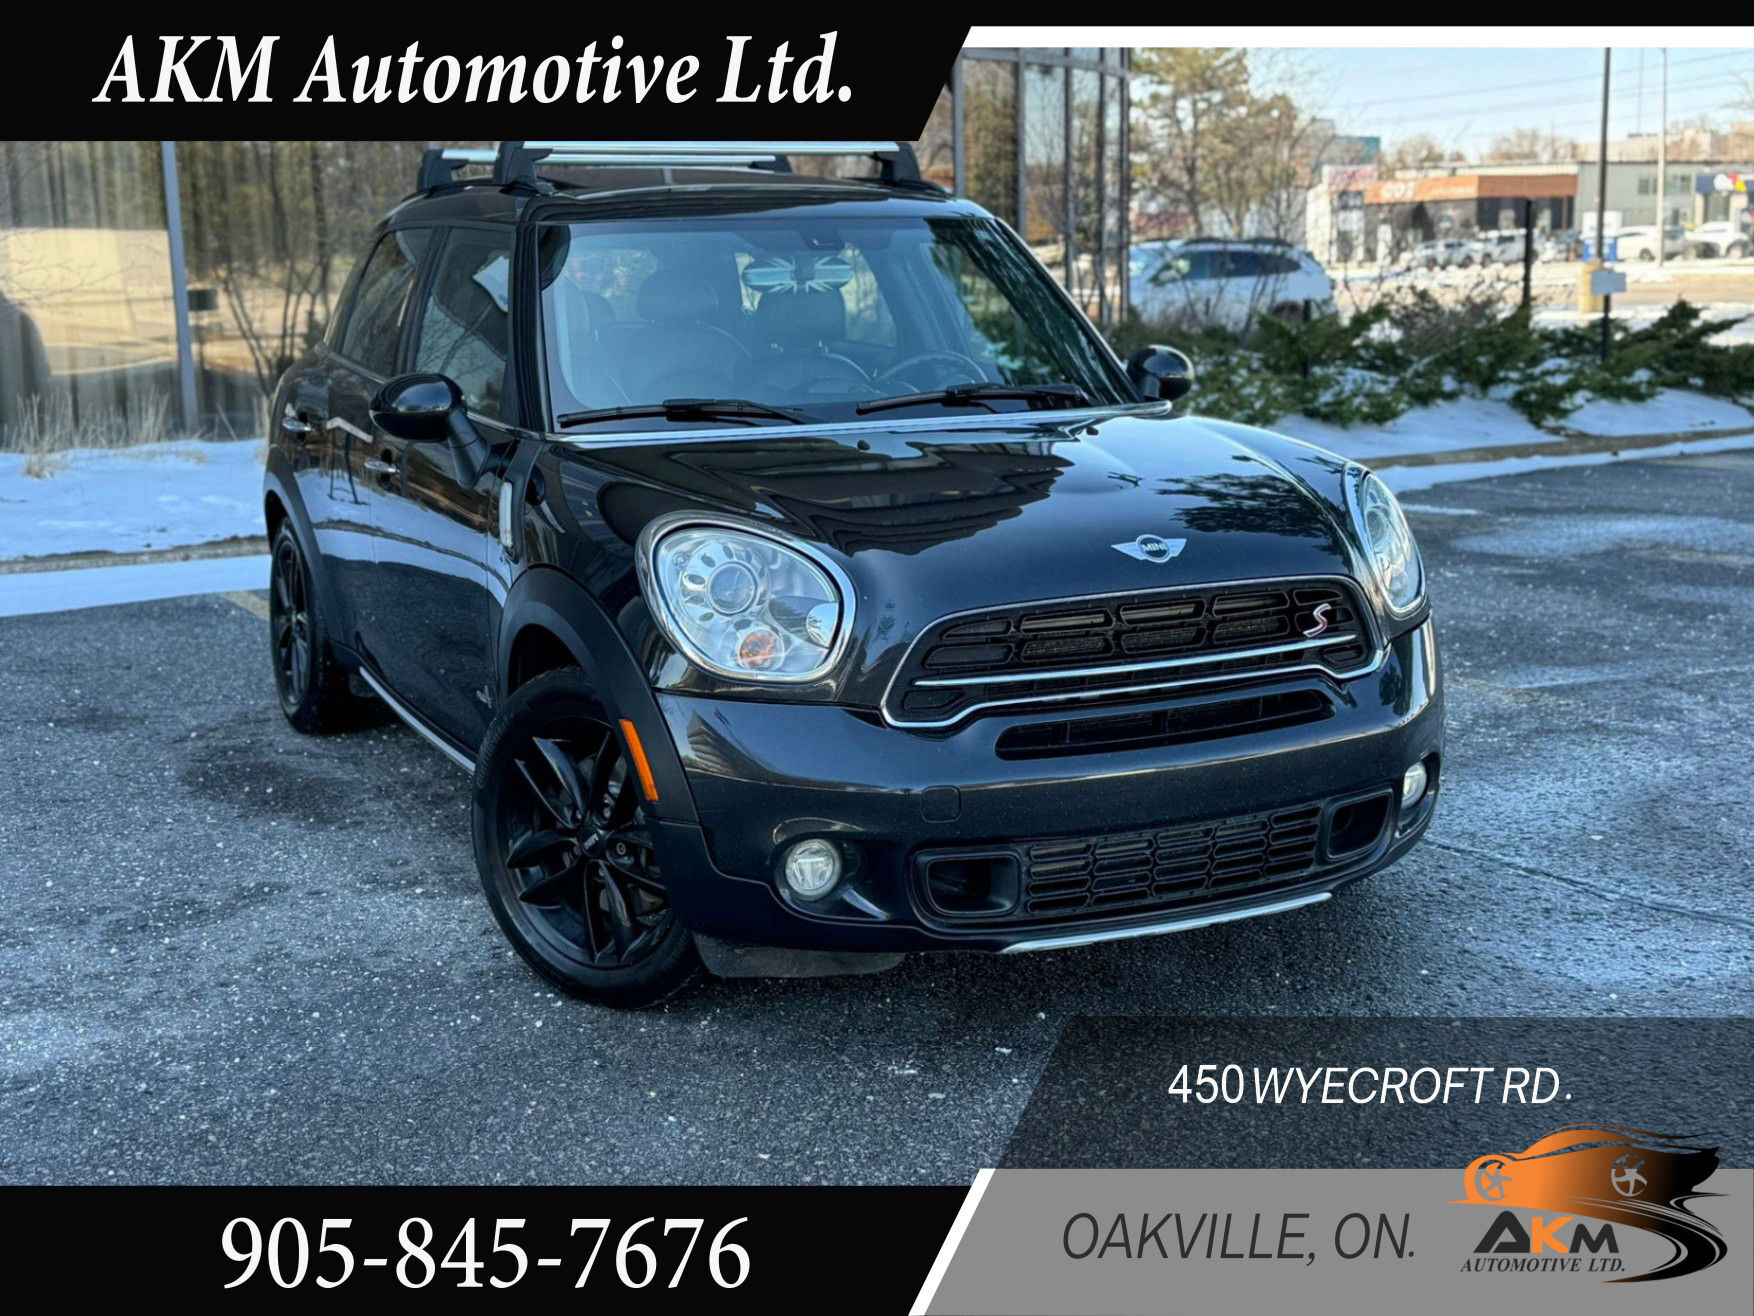 2015 MINI Cooper Countryman ALL4 4dr S, Certified